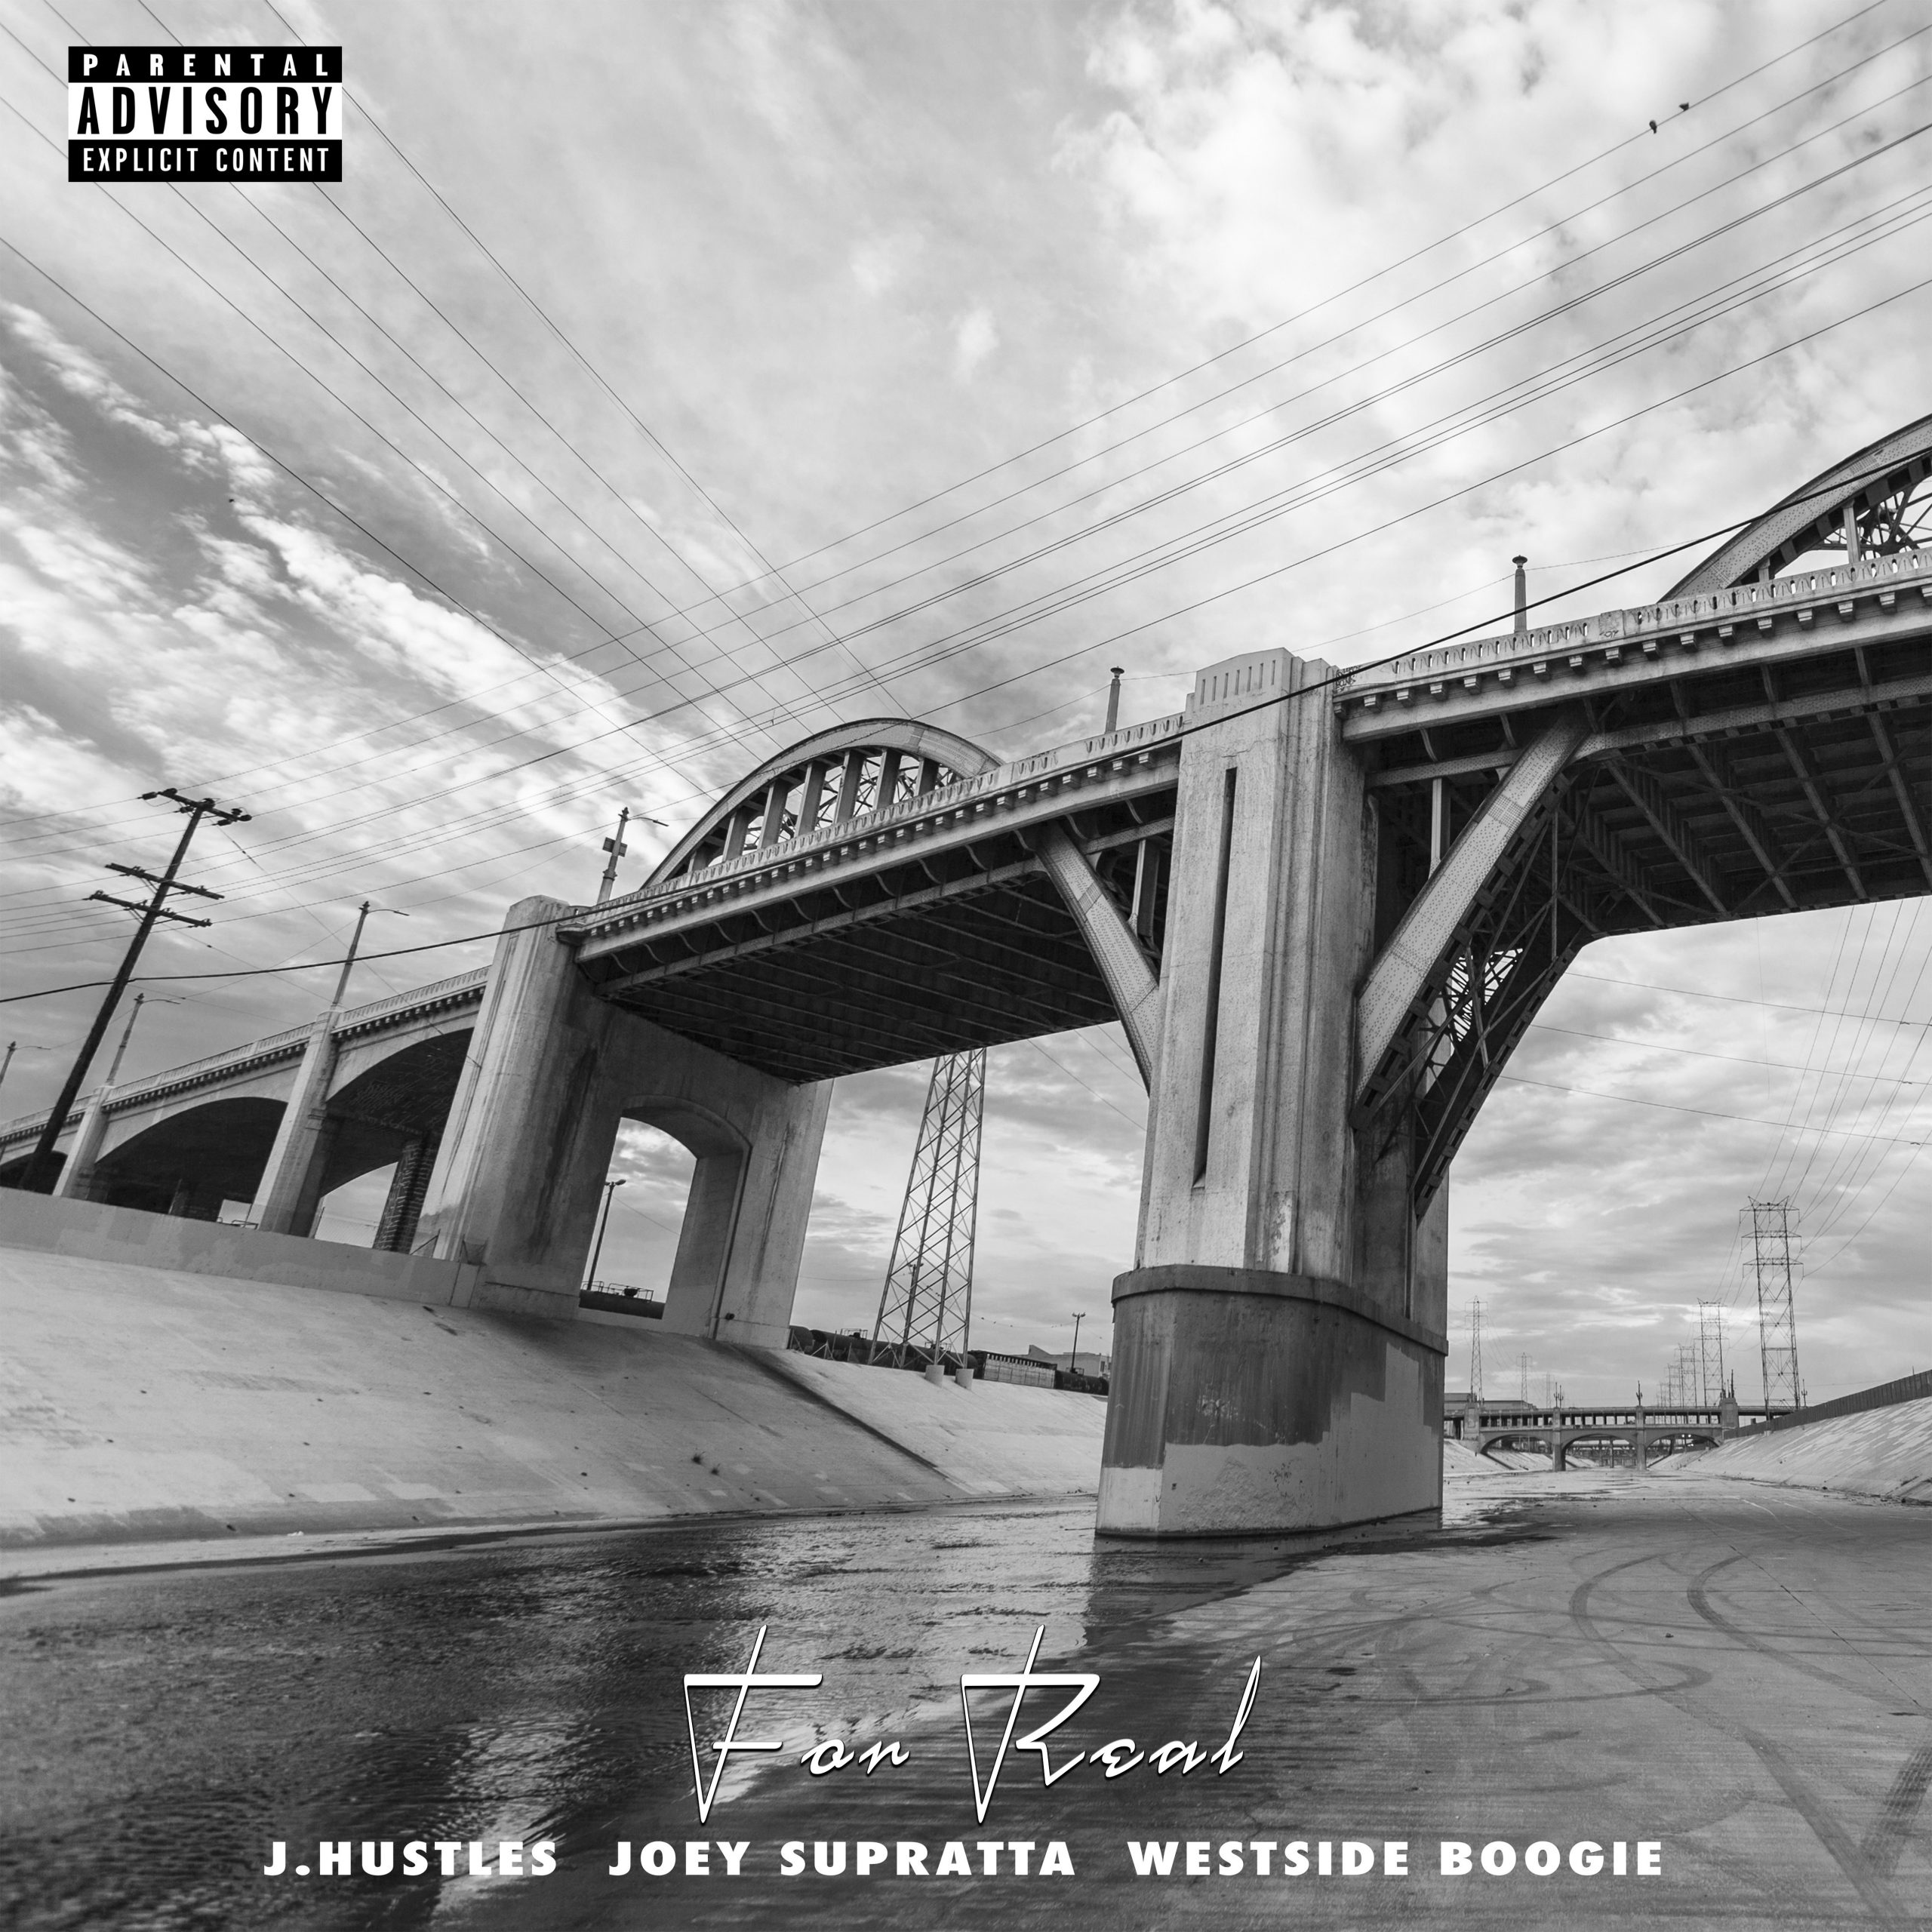 J. Hustles & Joey Supratta Connects with WESTSIDE BOOGIE for New Single 'For Real' 